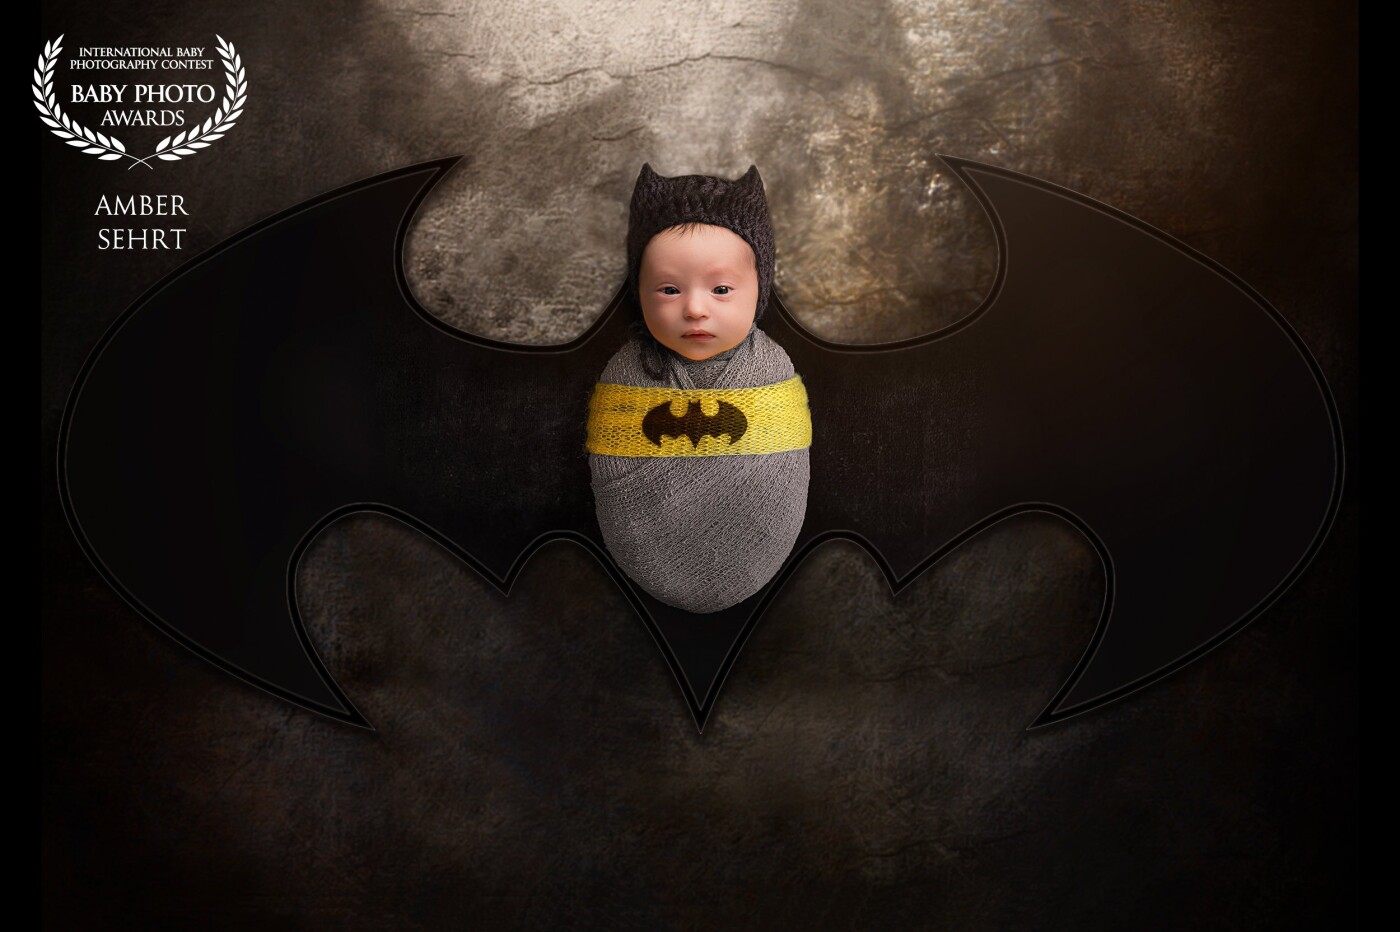 Mom and Dad are huge comic book fans, and Dad's favorite is Batman. So I promised Mom I would surprise her husband with something really special for his office. Guarantee no other Dad is going to have baby Batman on their wall.